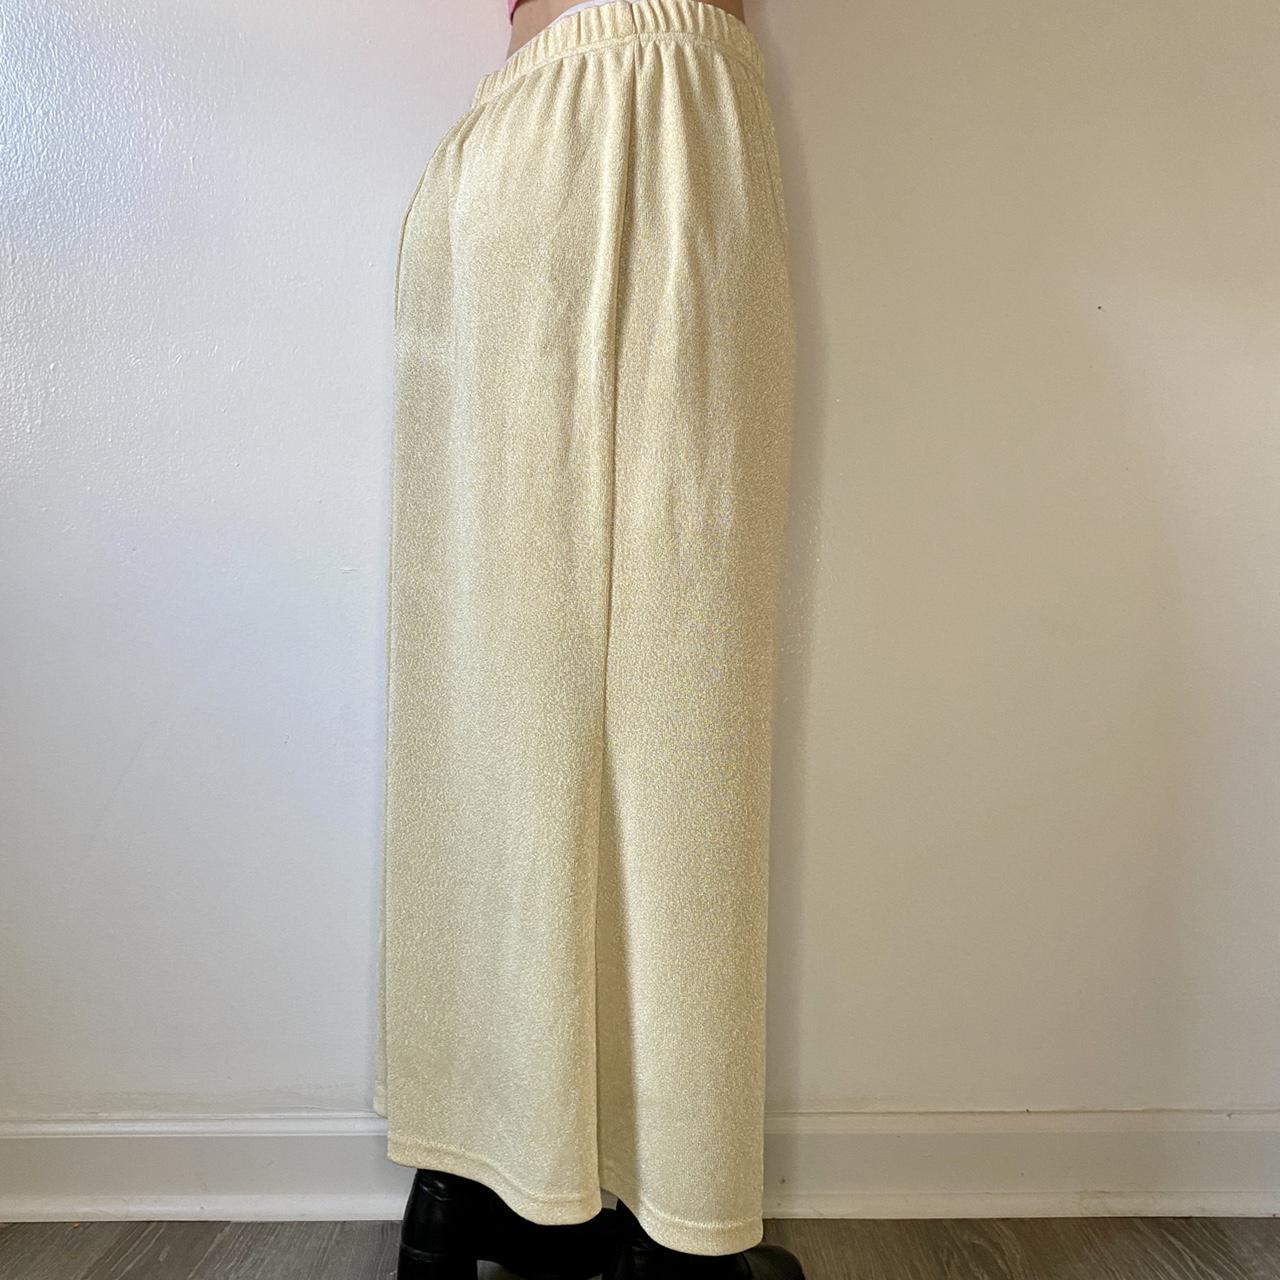 Product Image 4 - GOLD GLITTER SKIRT

This is so